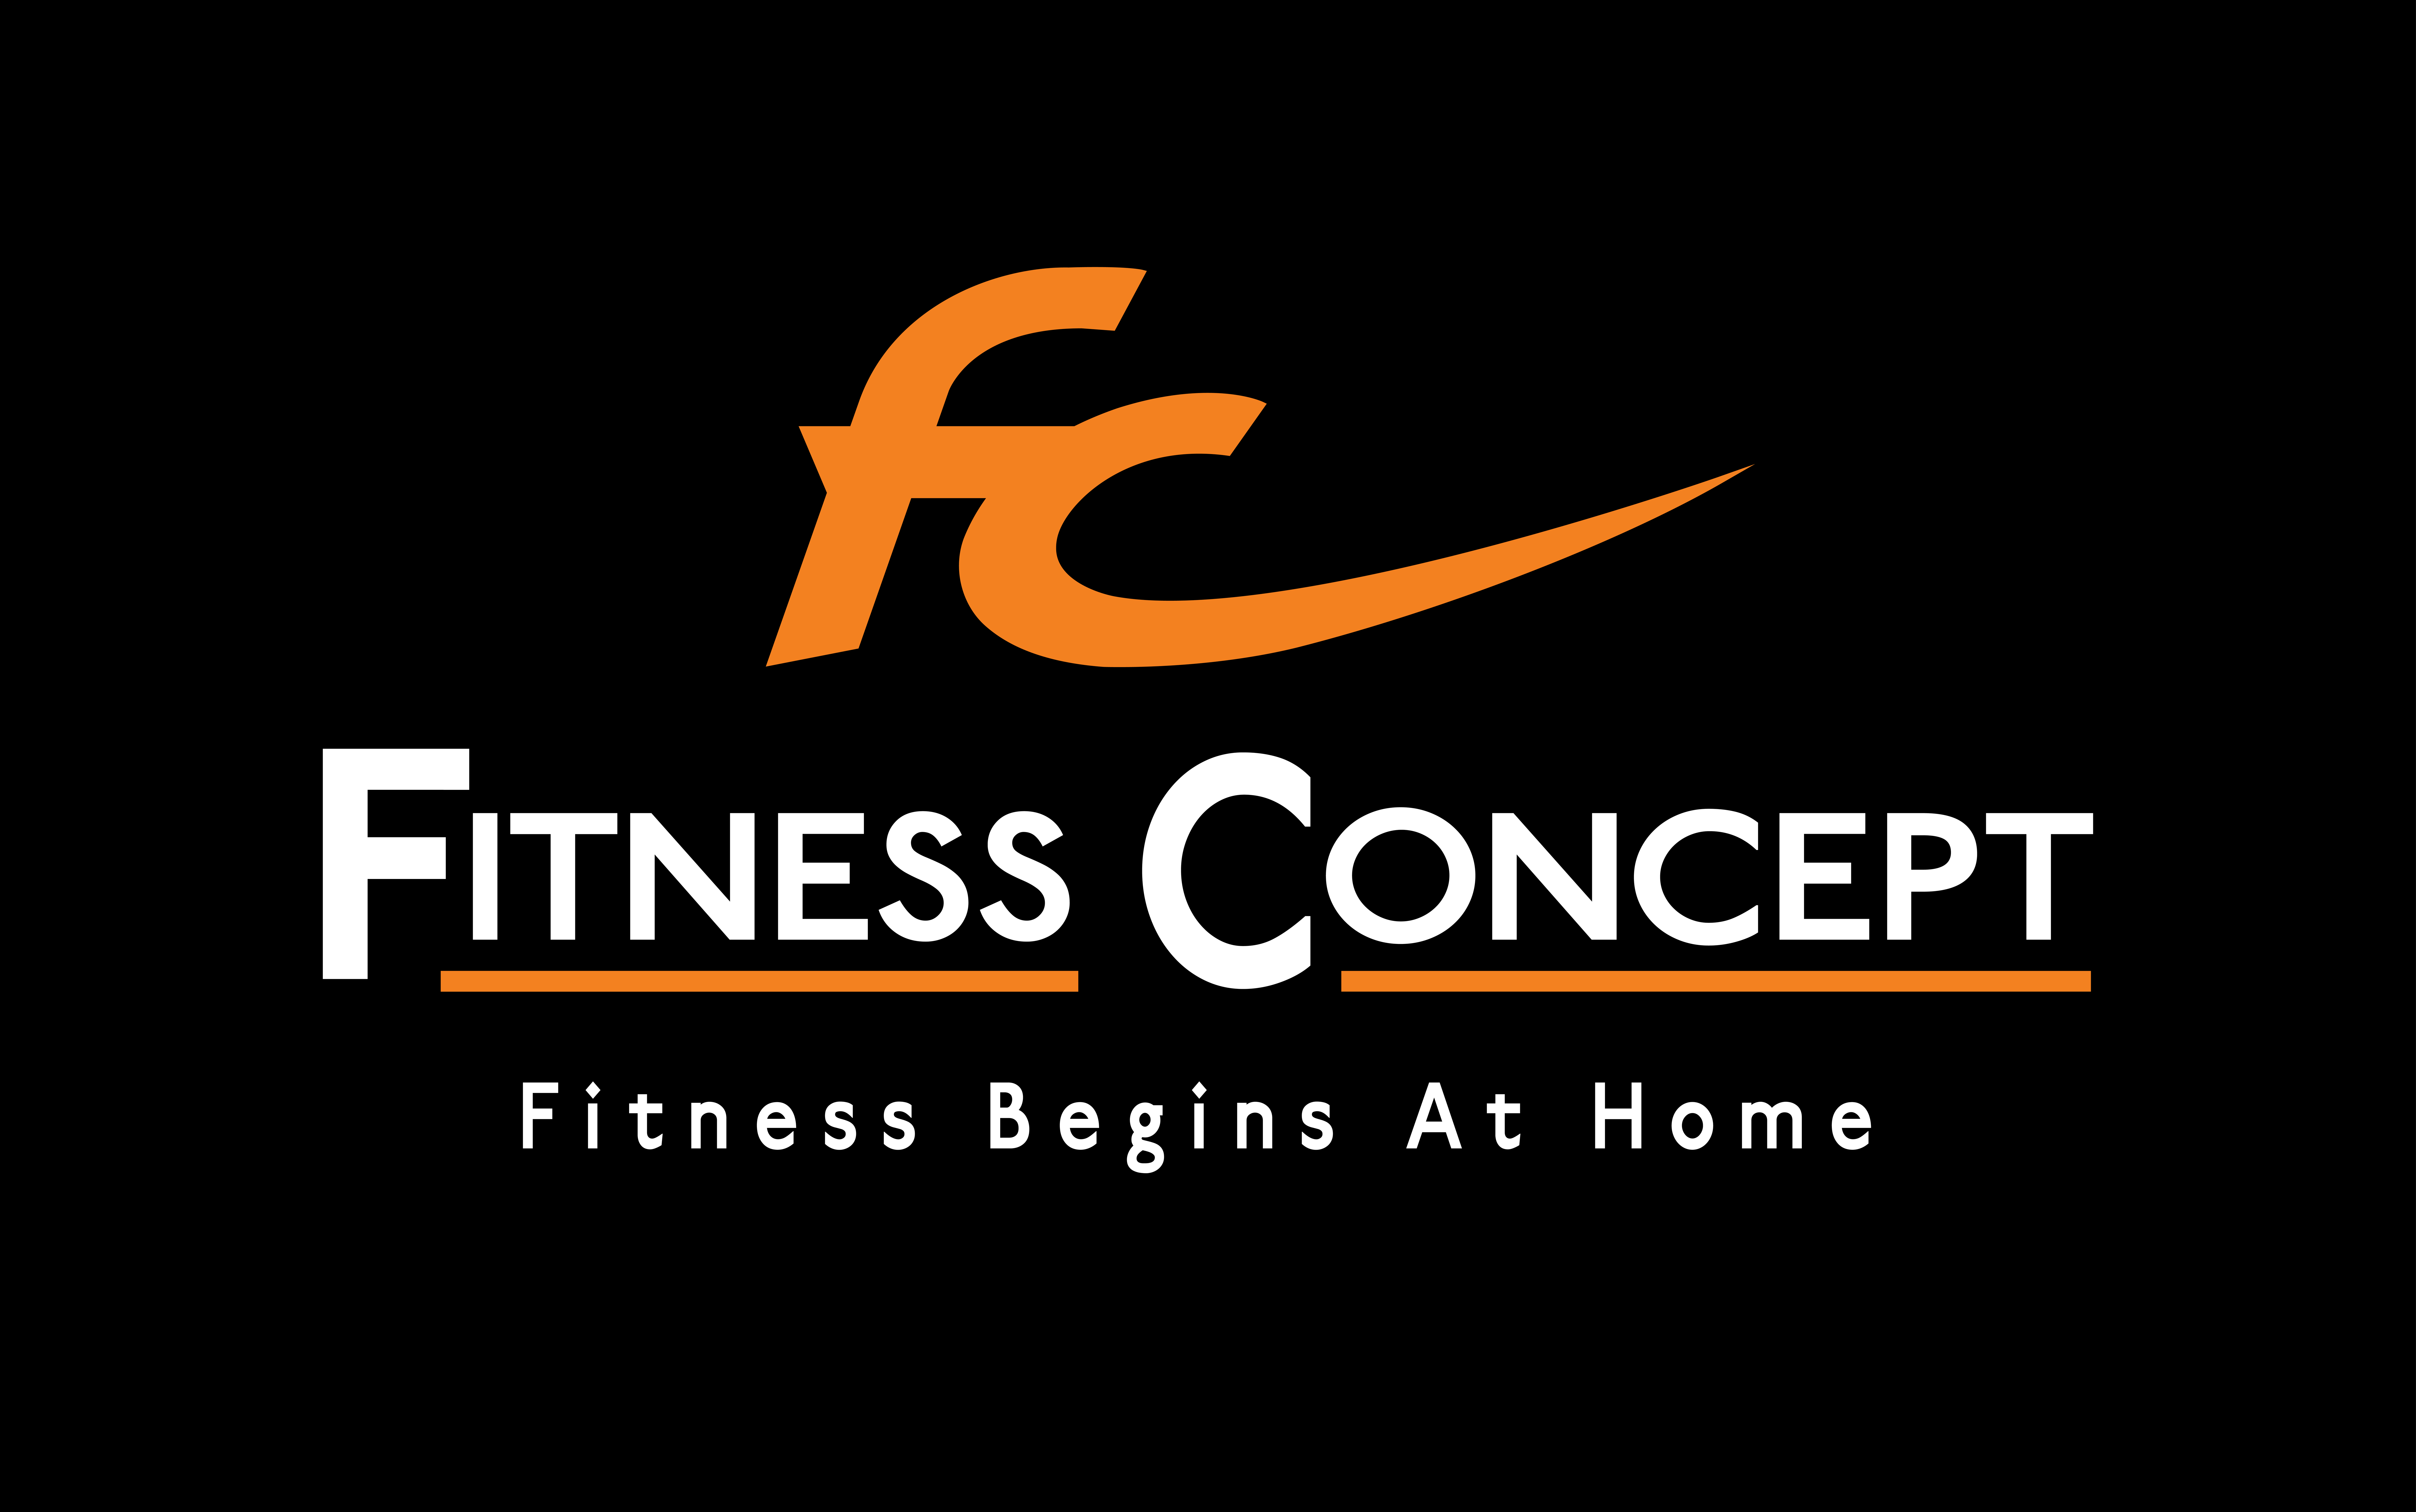 FITNESS CONCEPT